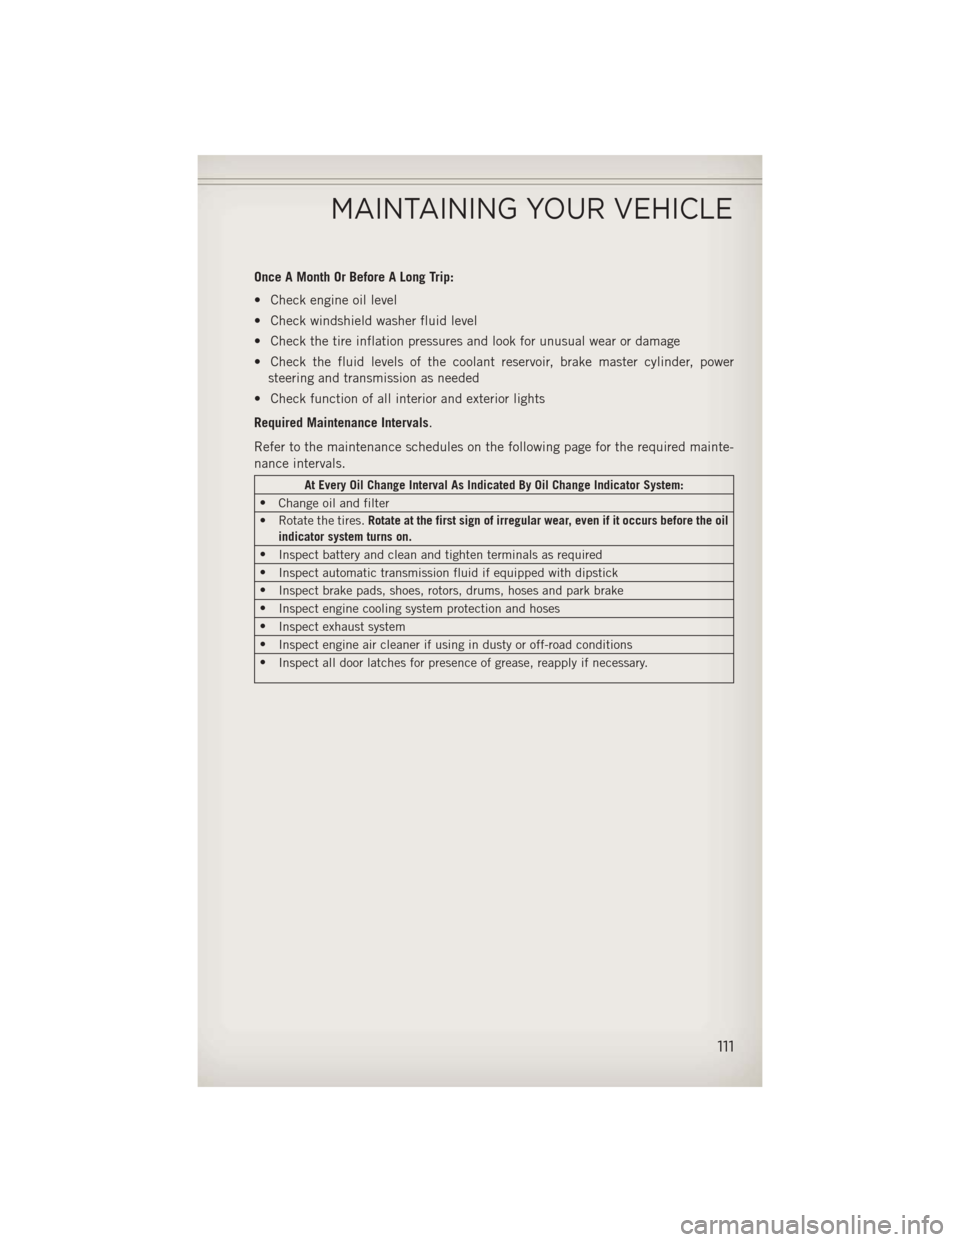 JEEP WRANGLER 2013 JK / 3.G User Guide Once A Month Or Before A Long Trip:
• Check engine oil level
• Check windshield washer fluid level
• Check the tire inflation pressures and look for unusual wear or damage
• Check the fluid le